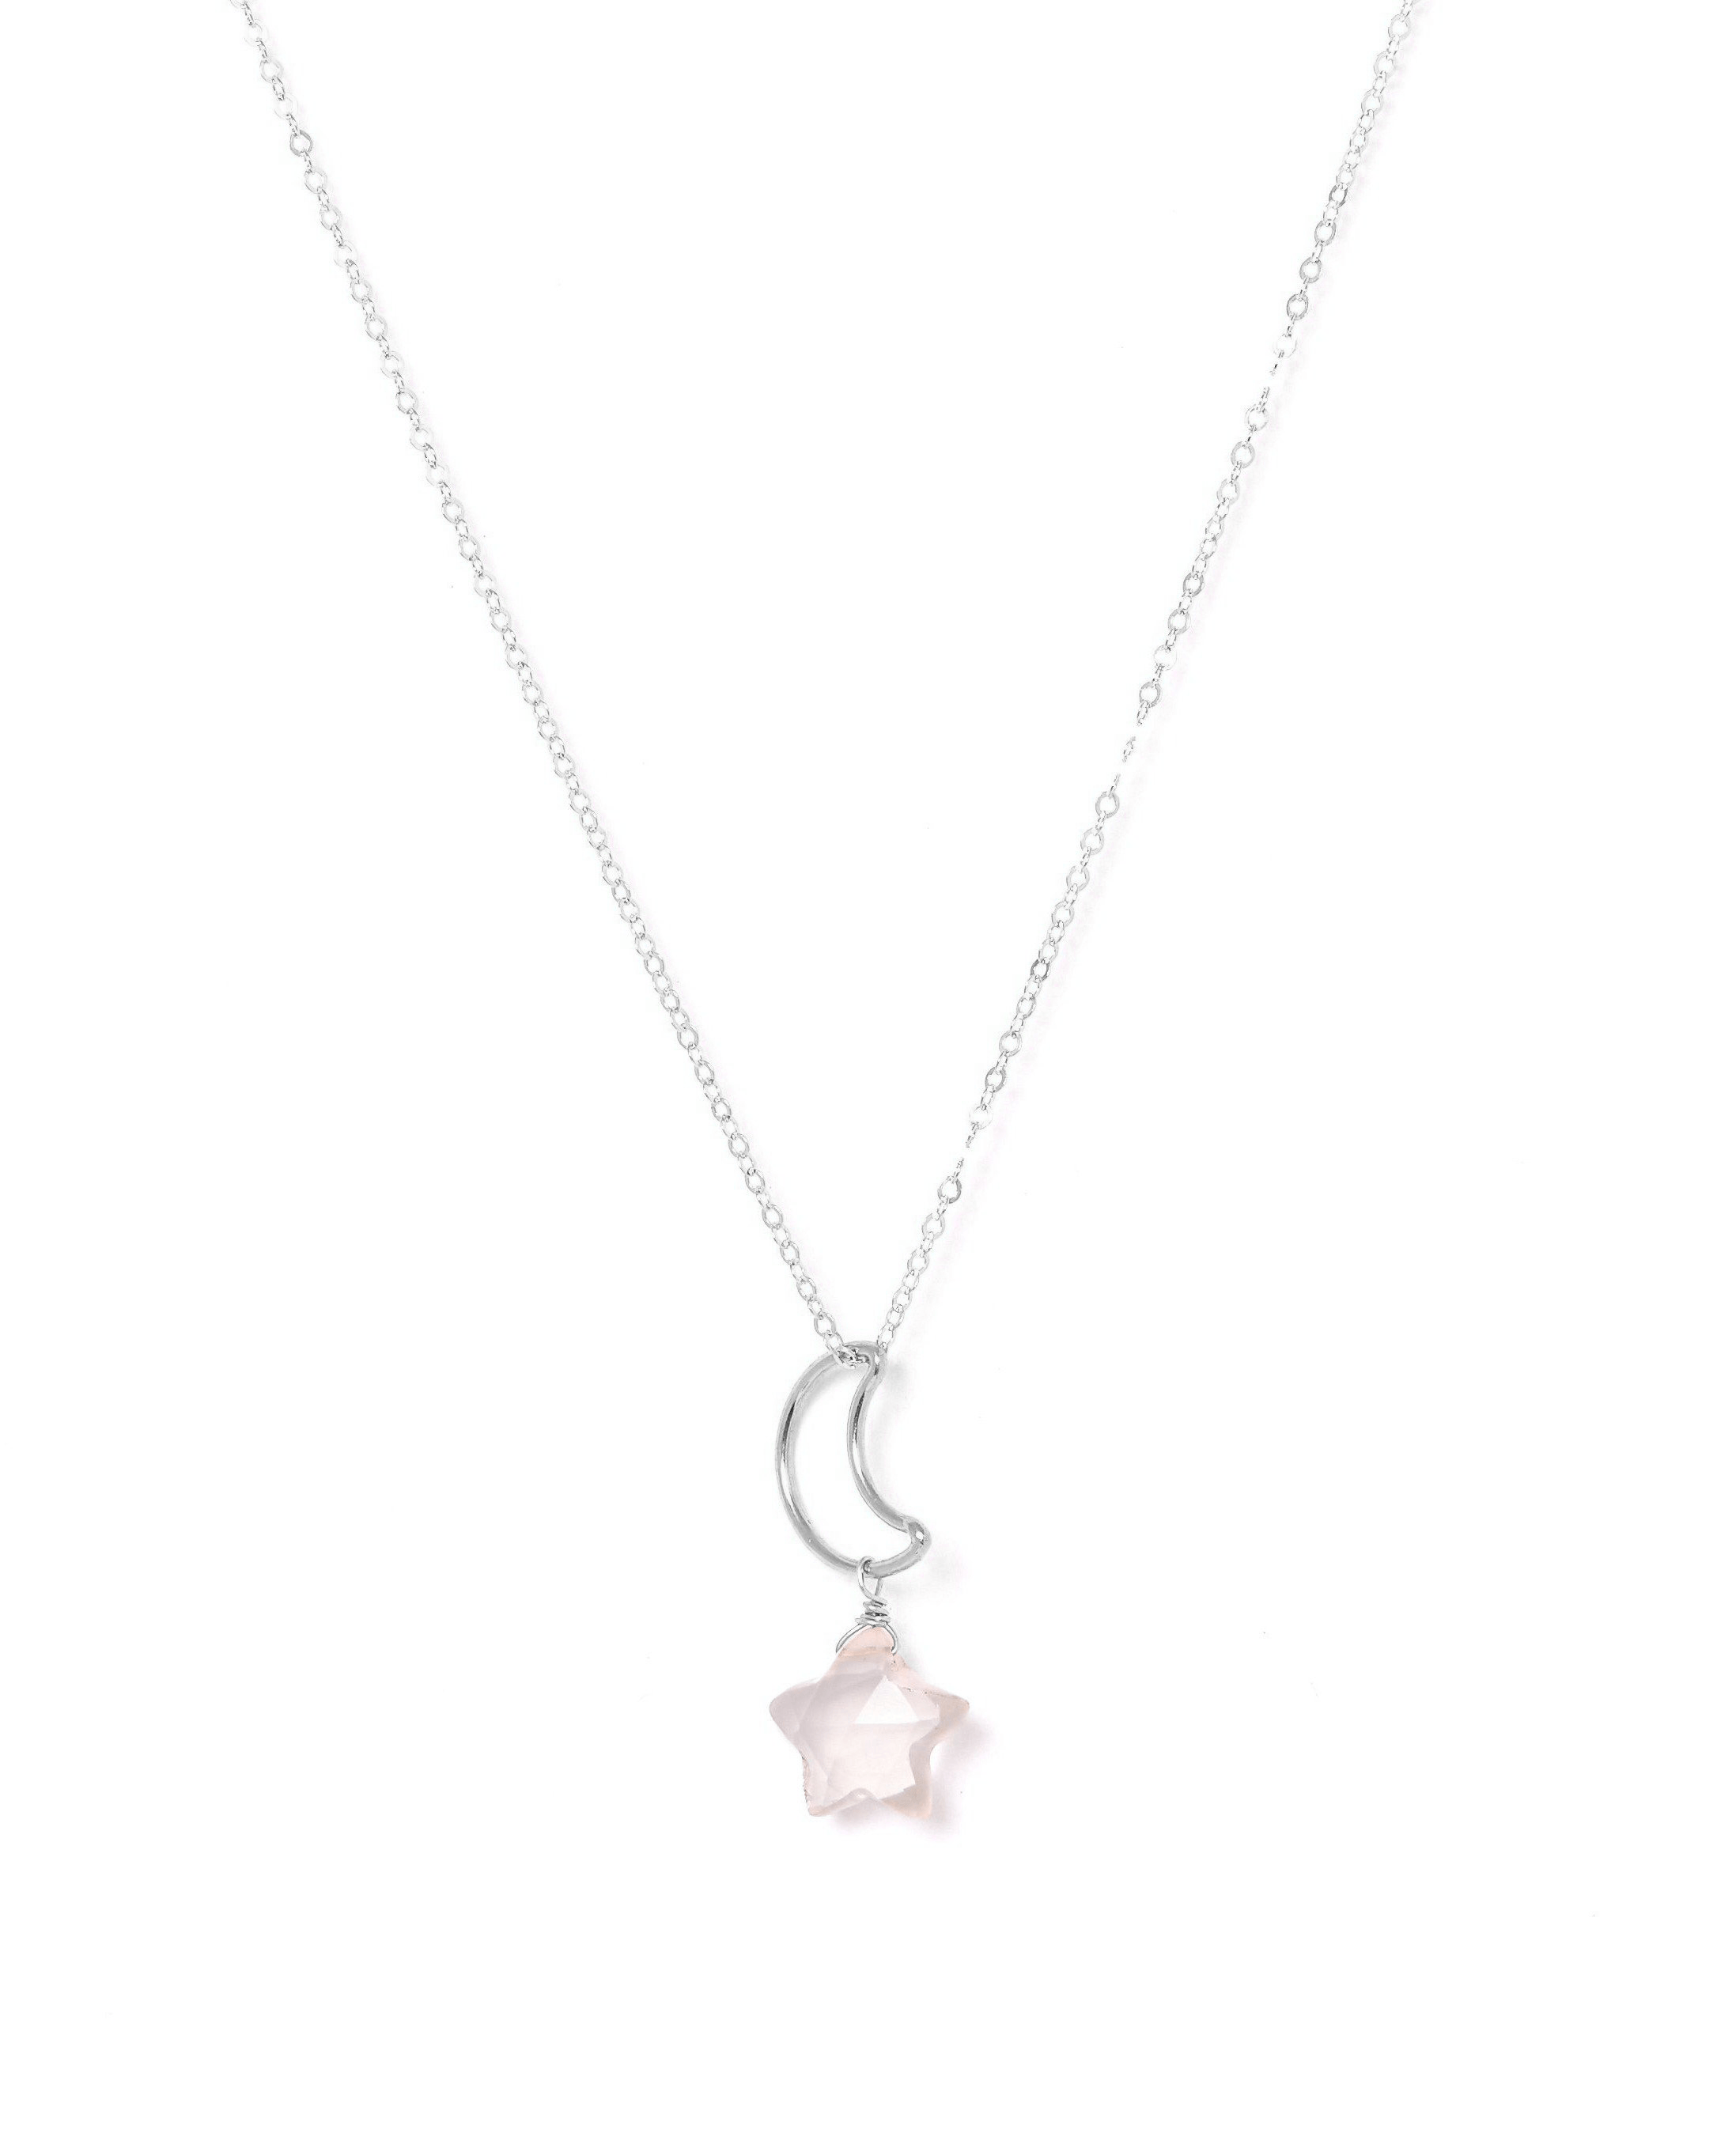 Lunastar Necklace by KOZAKH. A 16 to 18 inch adjustable length necklace, crafted in Sterling Silver, featuring a 13mm moon charm and a Rose Quartz star charm.